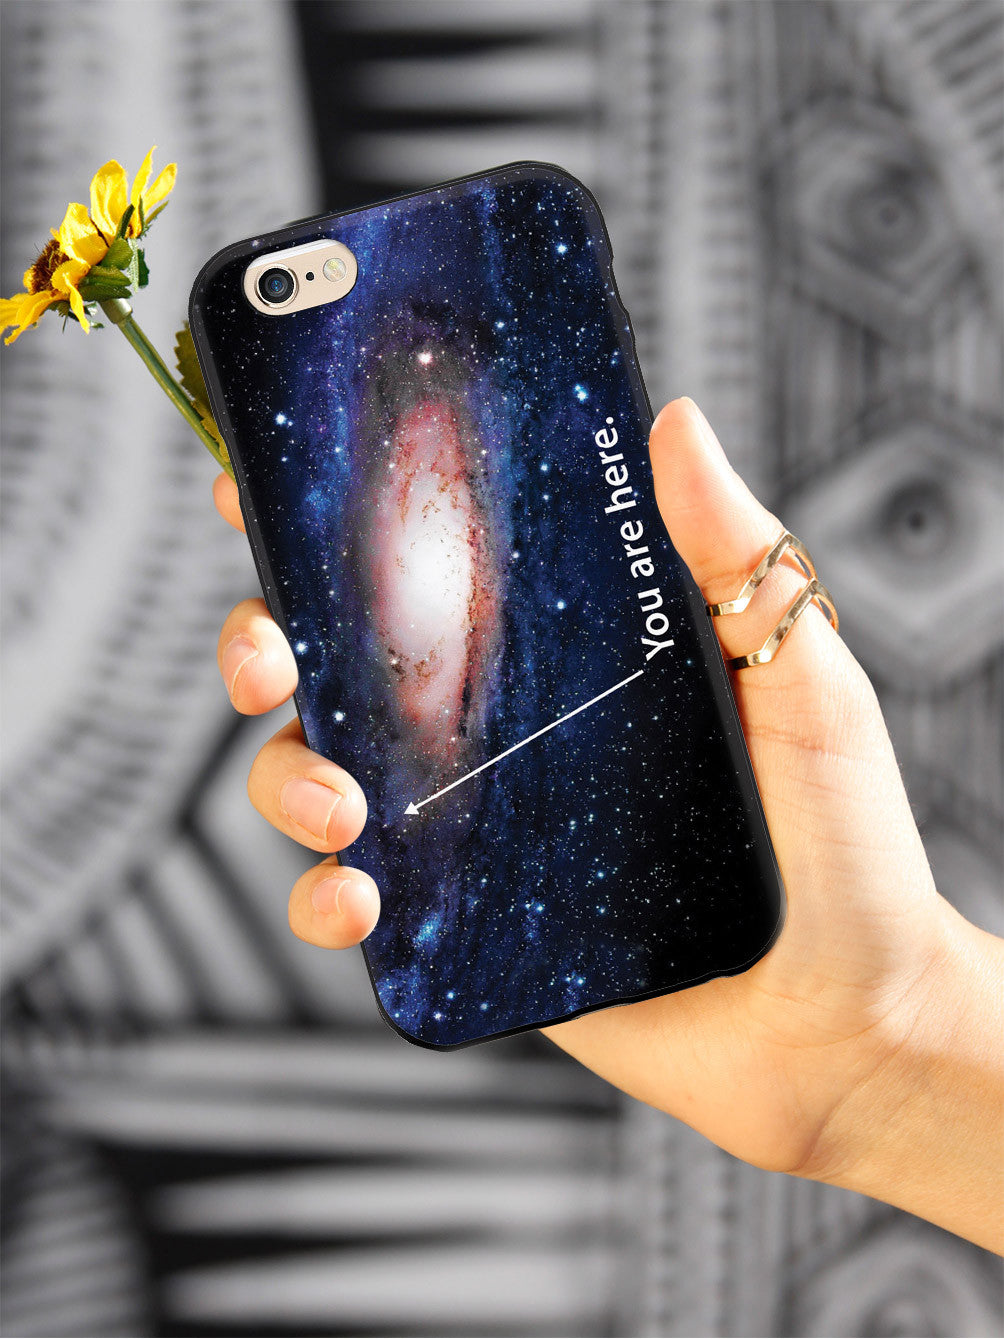 Milky Way Outer Space - You Are Here  Case